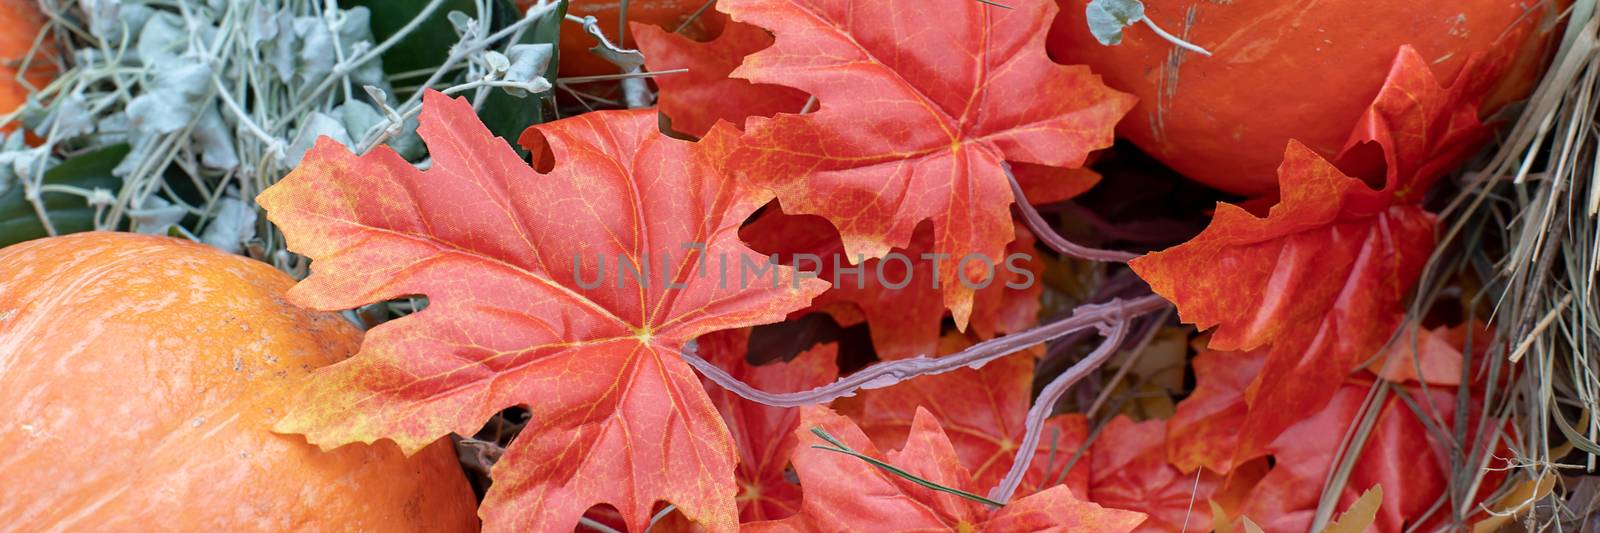 Happy Thanksgiving Day in Canada. Orange pumpkin and maple leaf background. Nature vegetable food agriculture harvest season. Thanksgiving, Halloween and autumn holiday concept